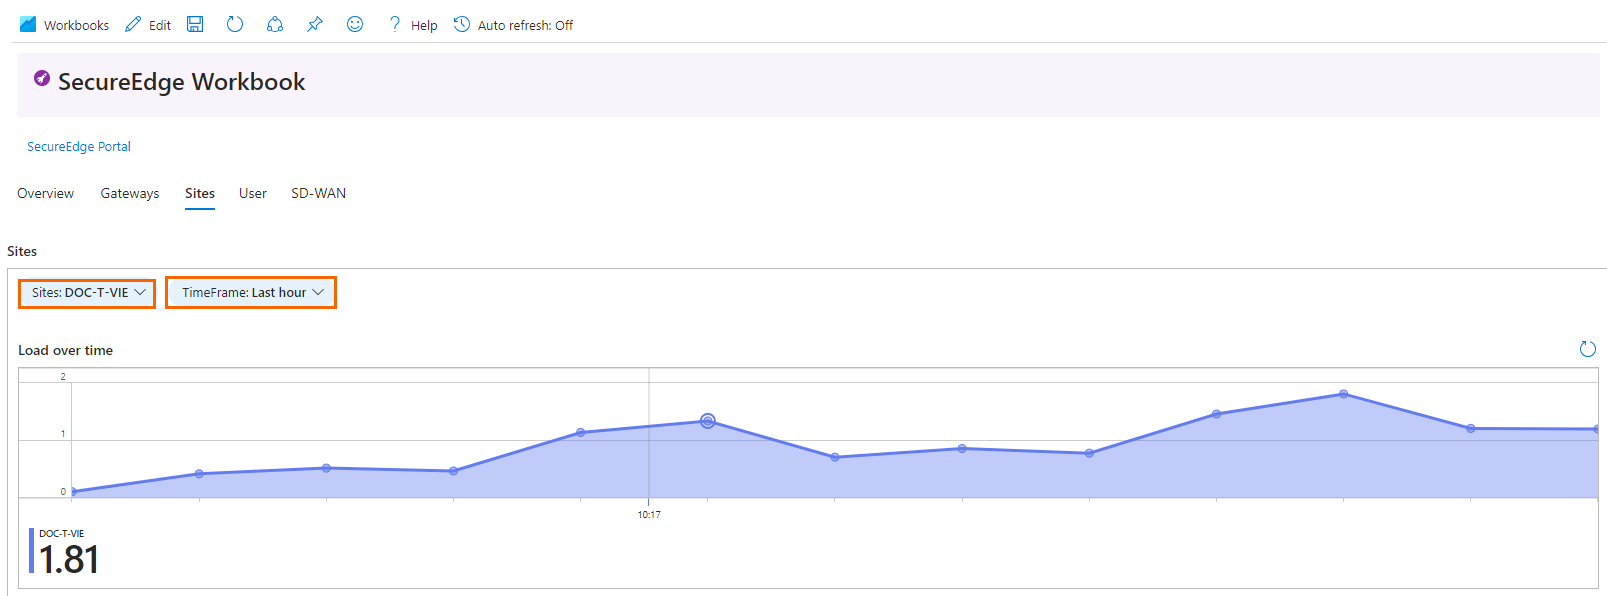 Site-Load over time.png